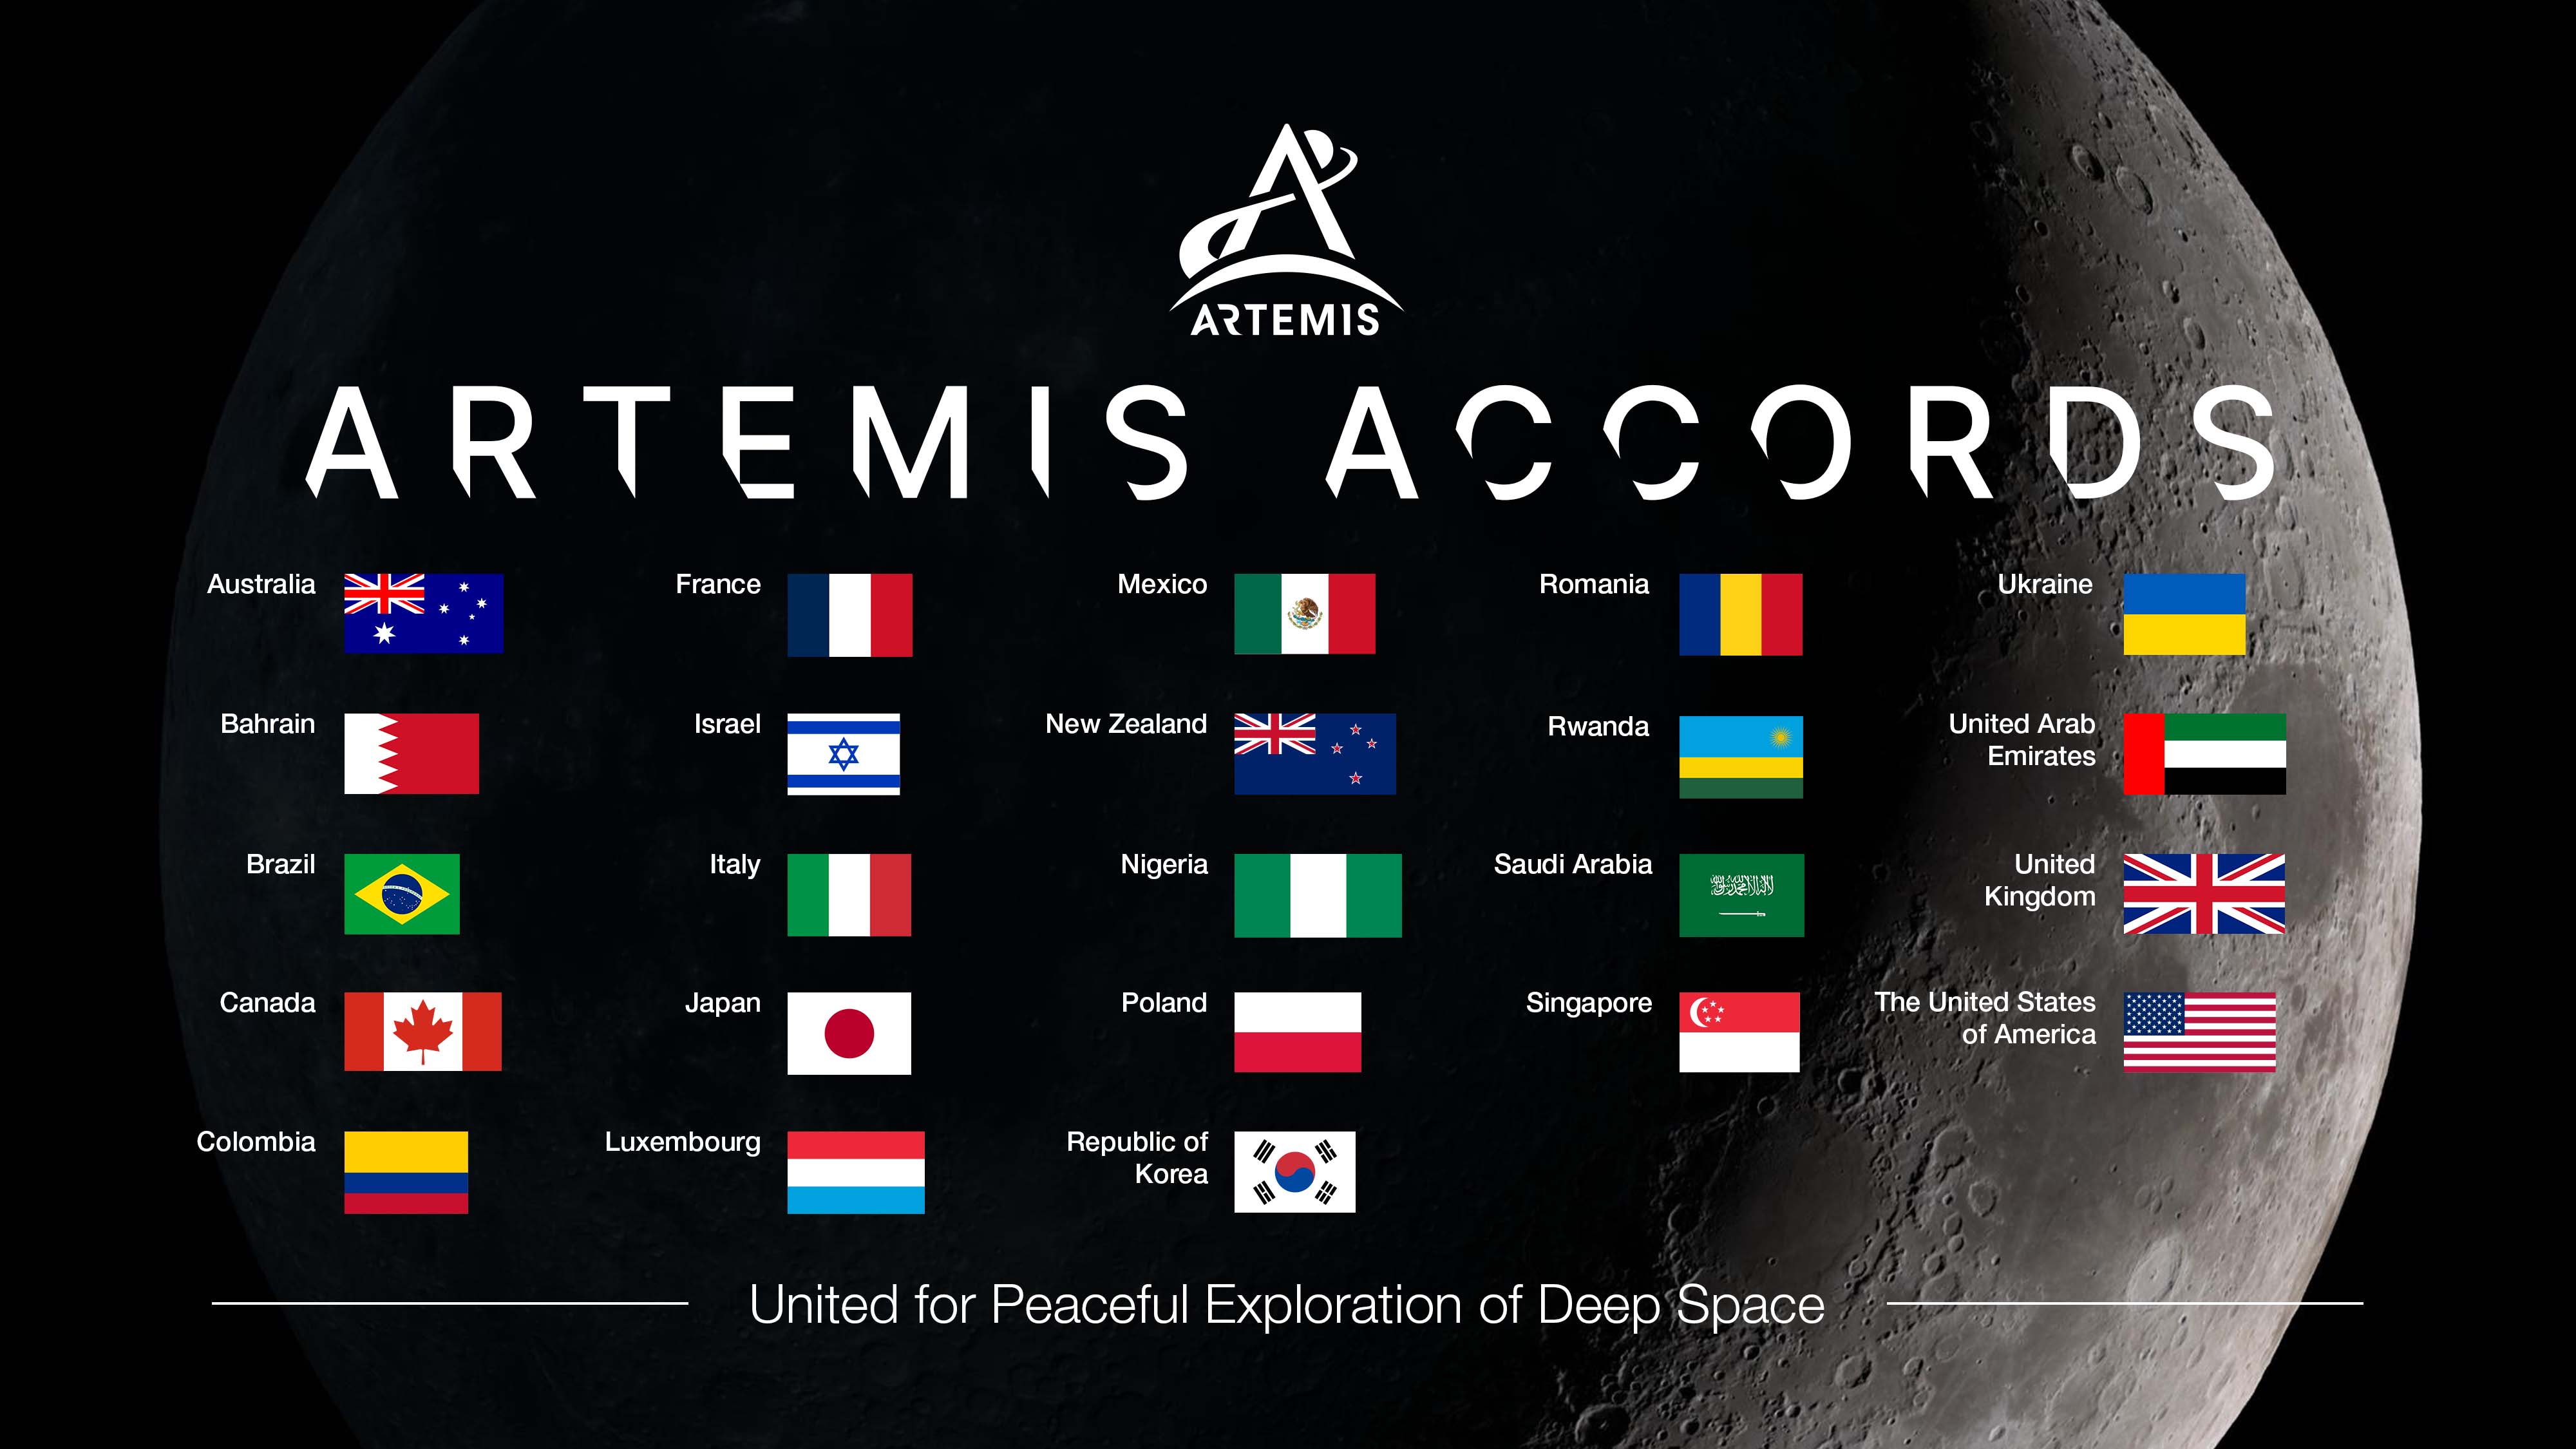 A graphic illustrating the nations that have signed the Artemis Accords.